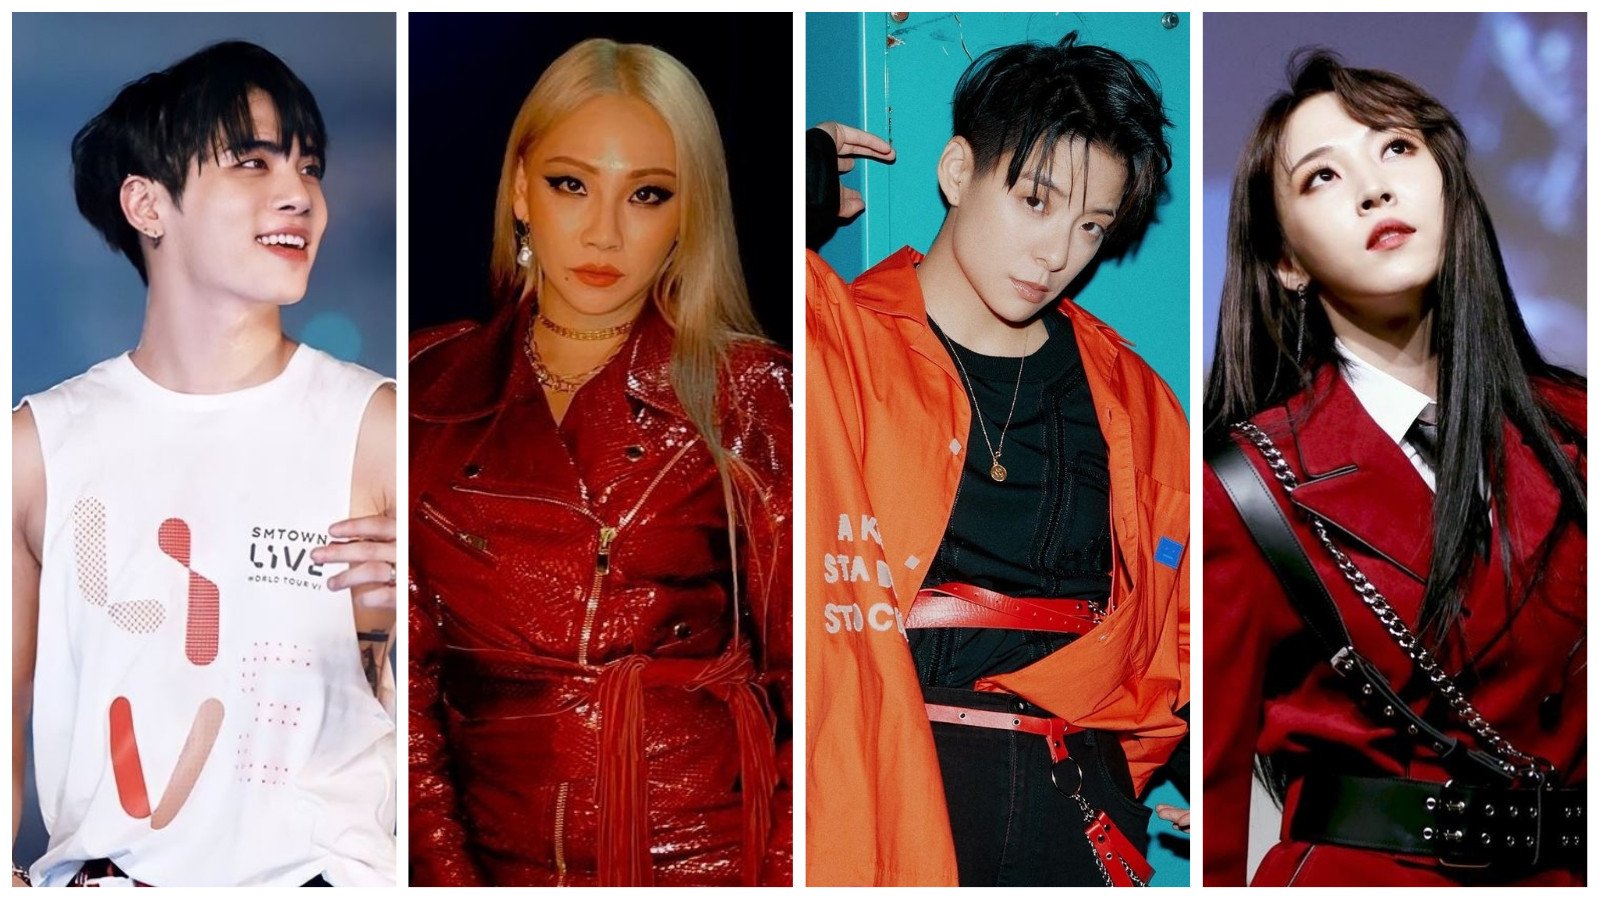 These K-pop stars are all about pushing the boundaries and breaking gender stereotypes. Photos: @PaperSHINee/Twitter, @chaelincl/Instagram, @ajol_llama/Instagram, @simpforbyulyi/Twitter